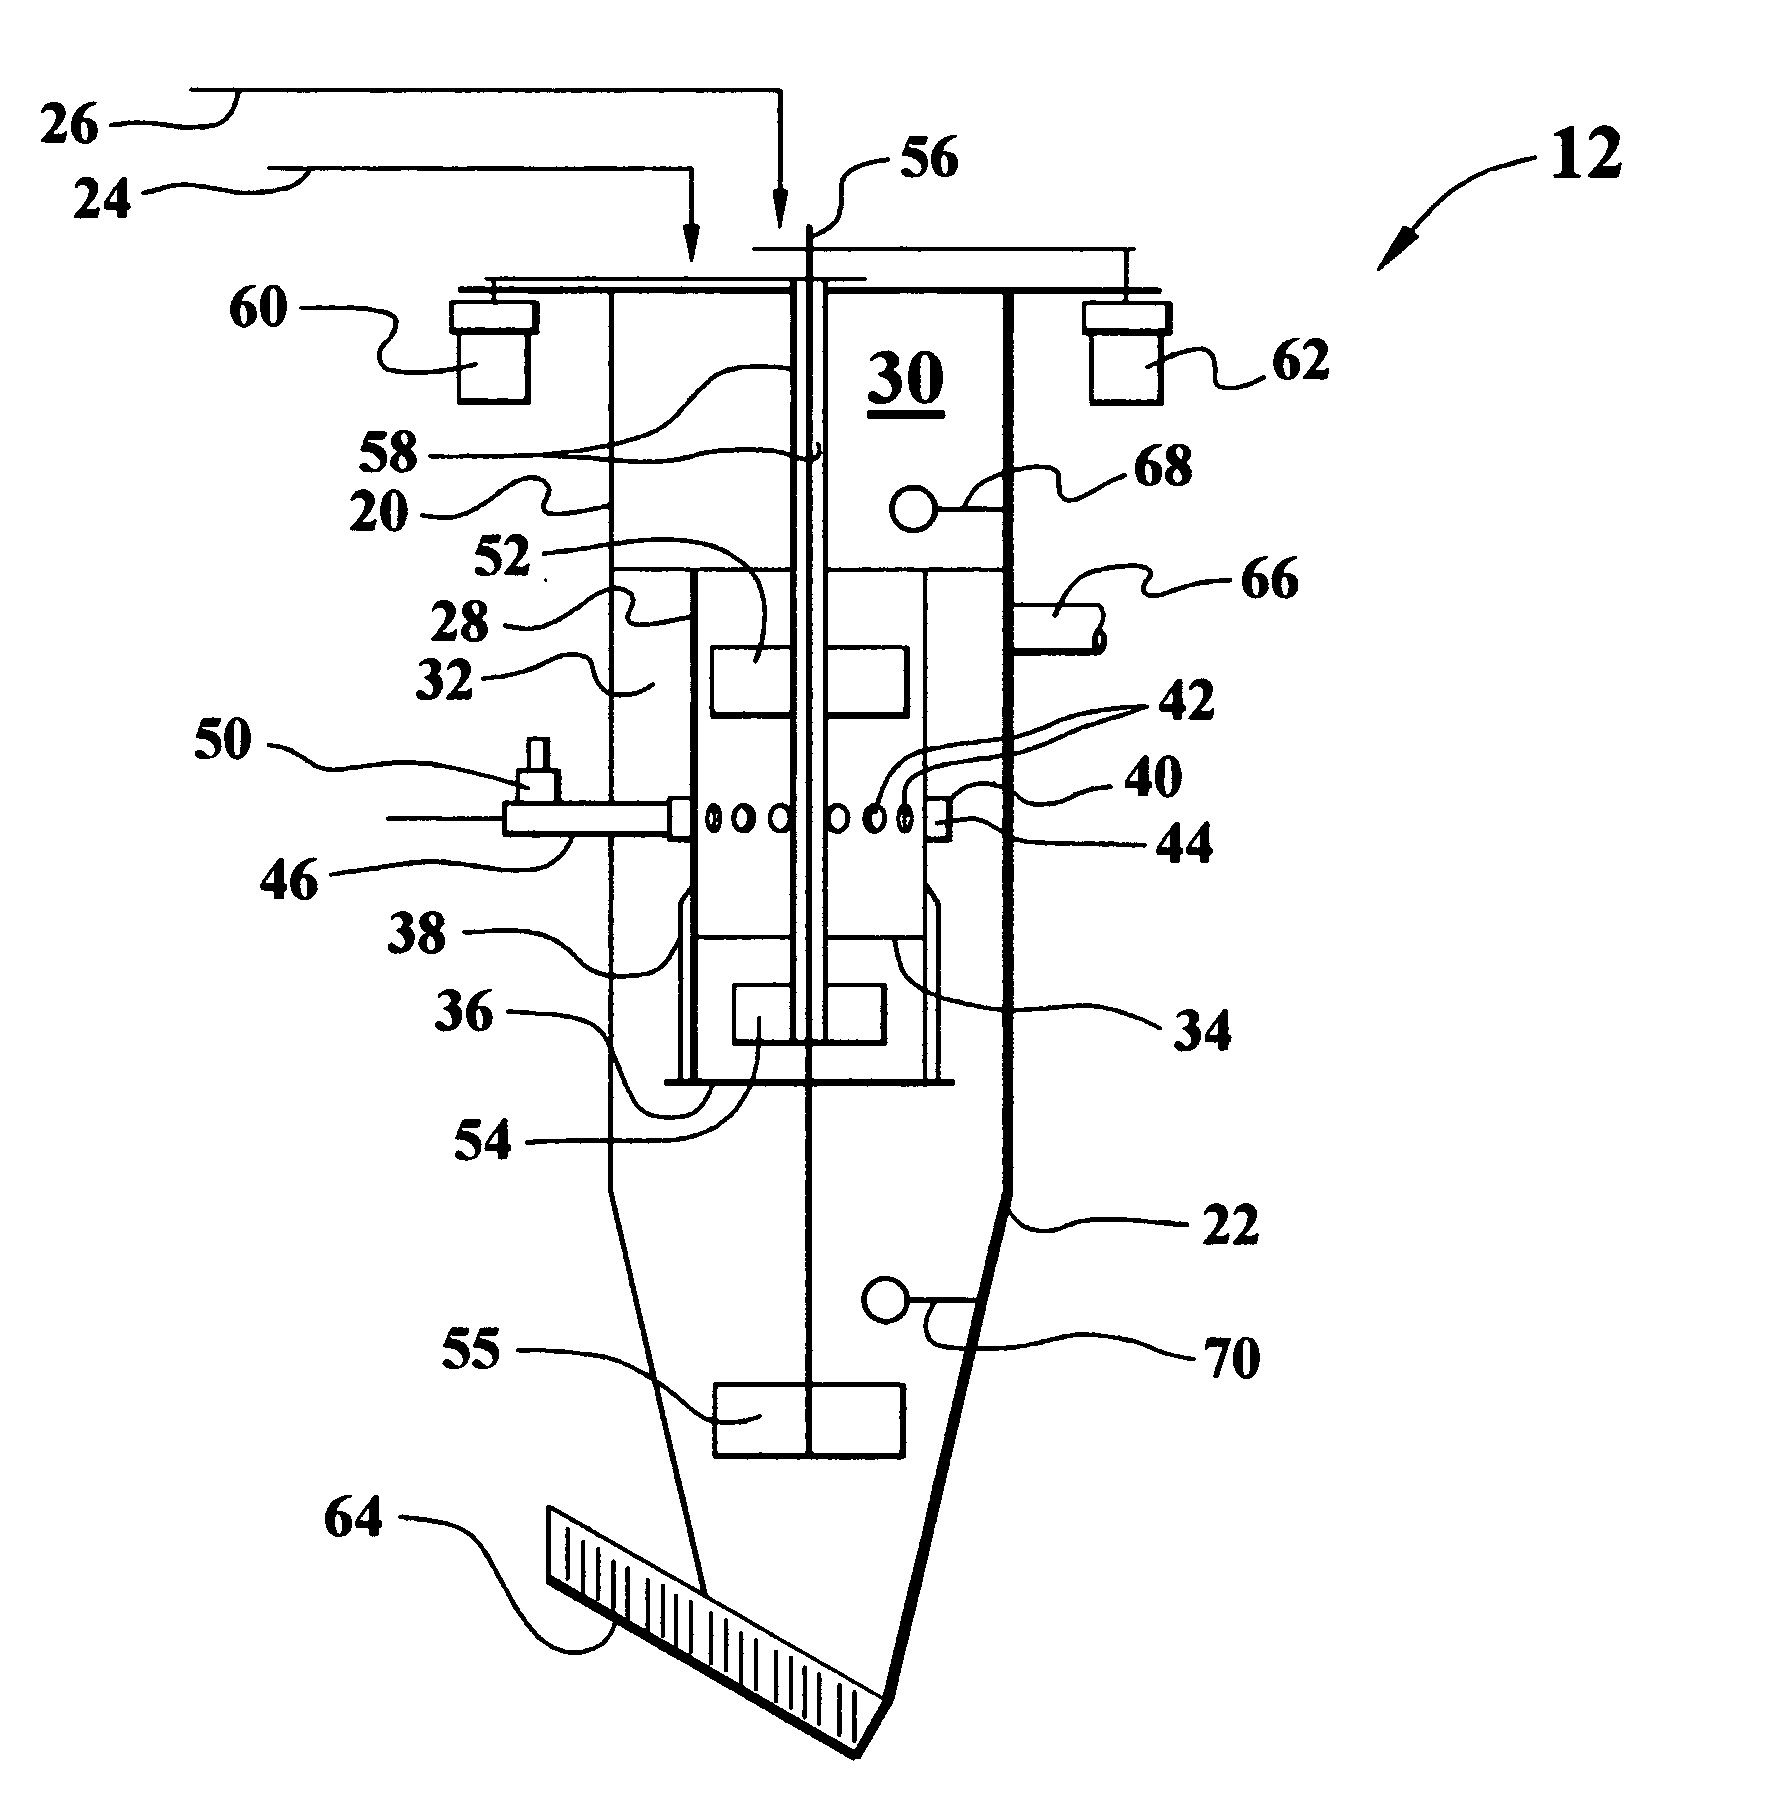 Gasification apparatus and method